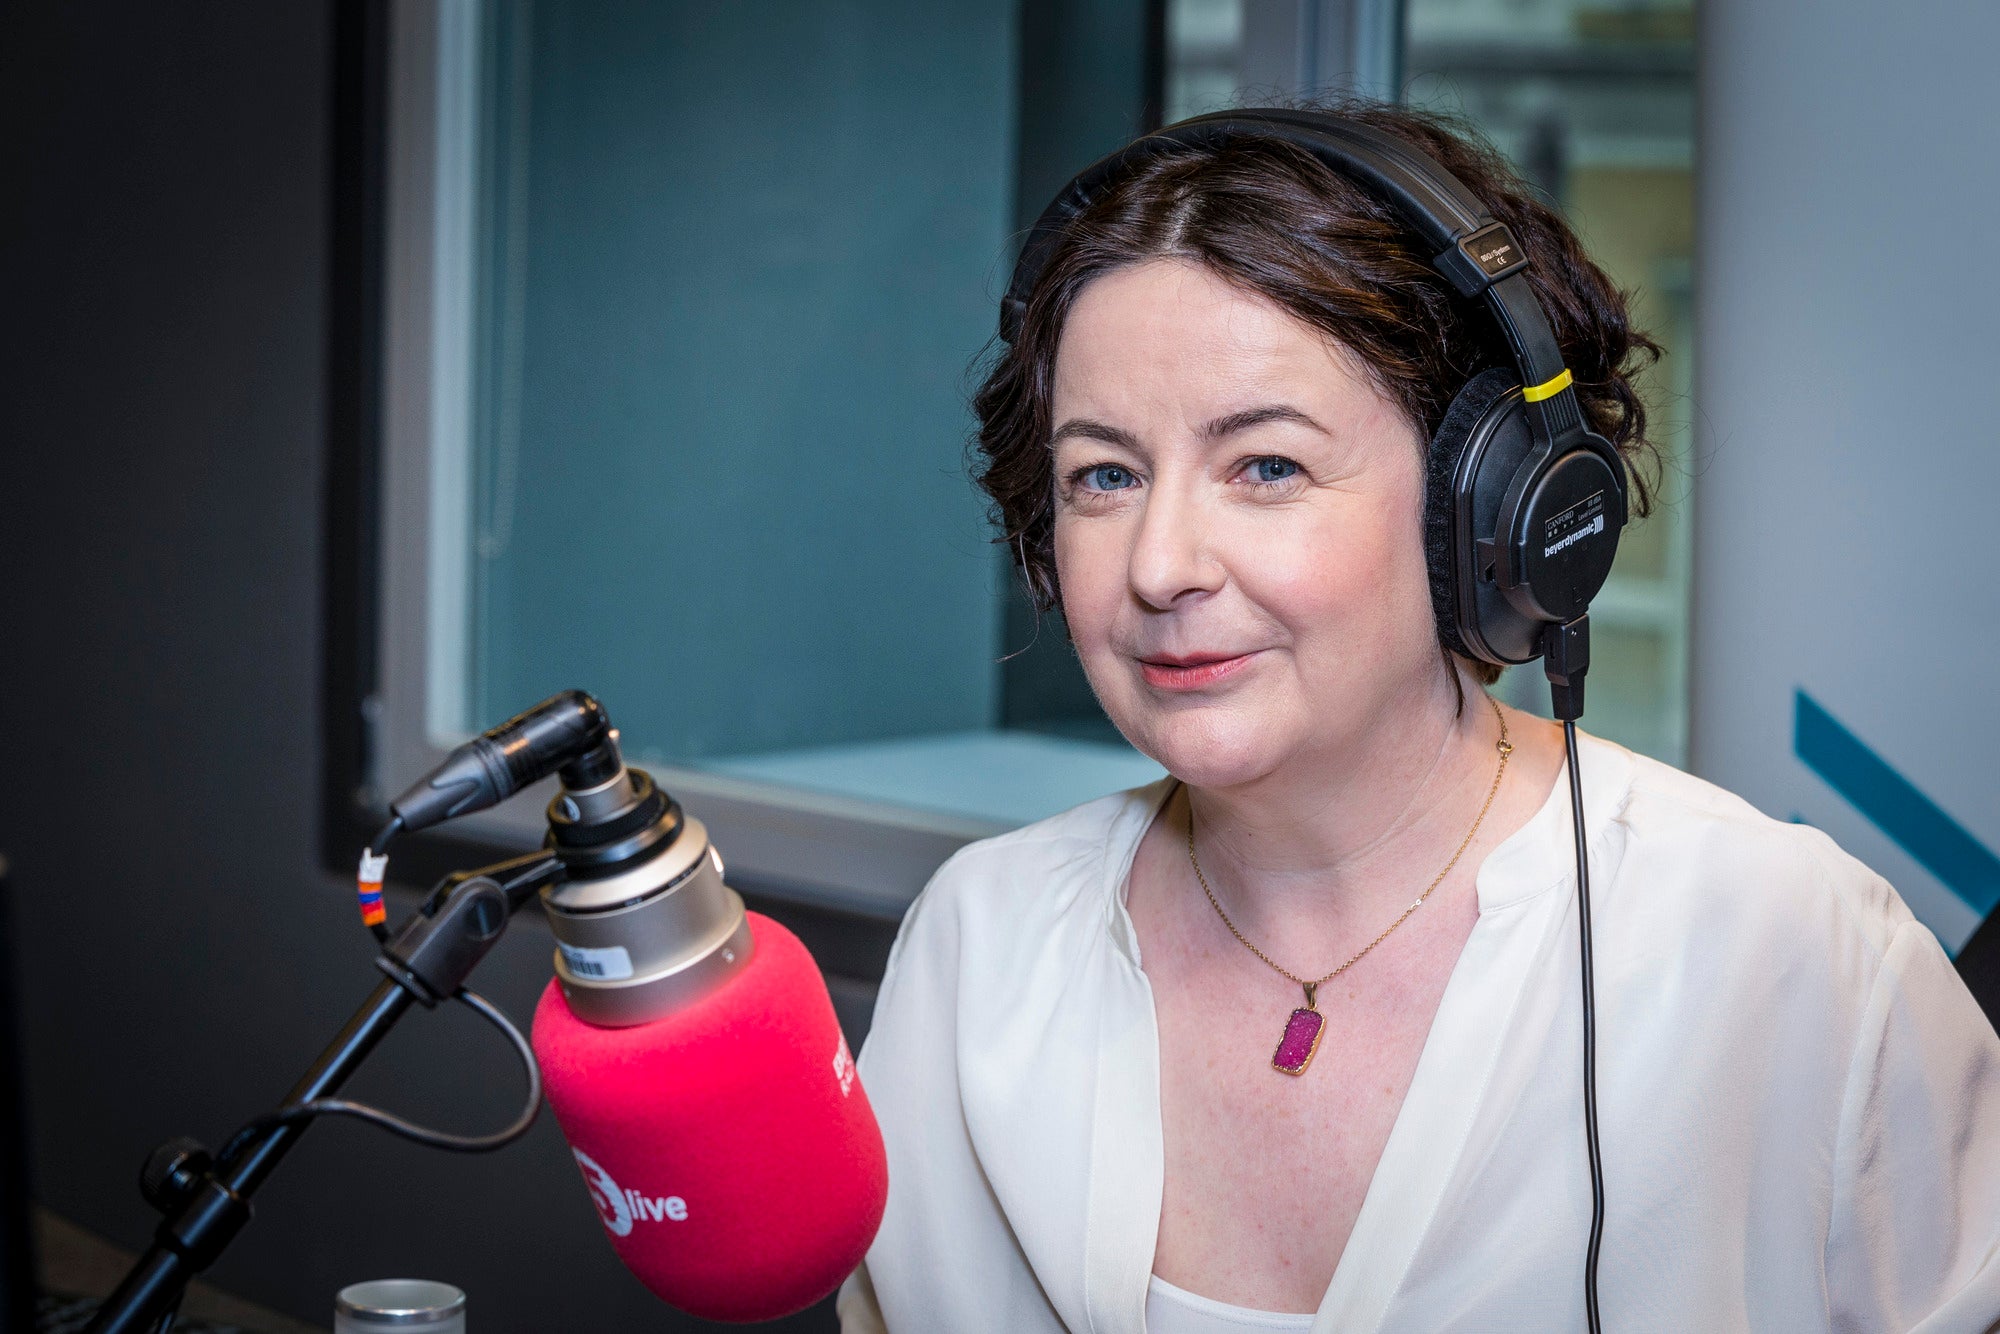 Jane Garvey is stepping down from Woman’s Hour after 13 years